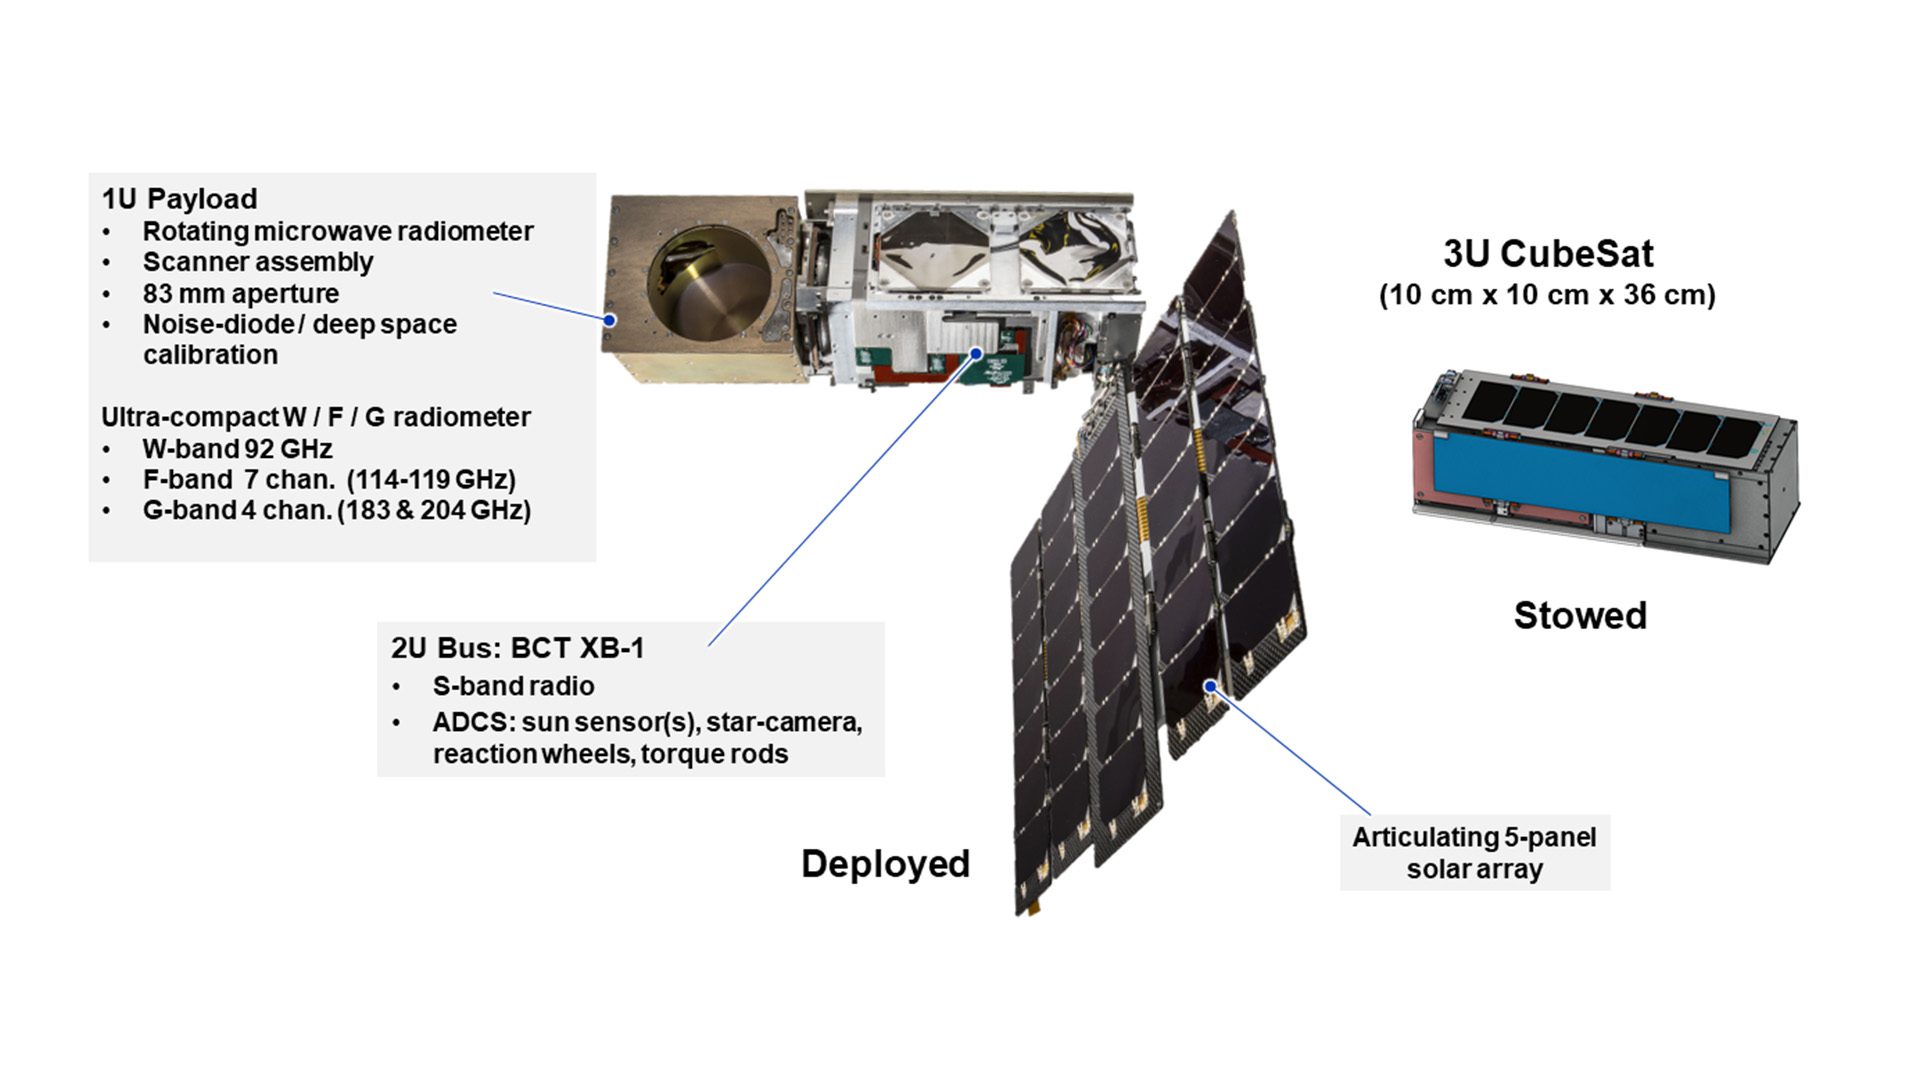 The payload of a TROPICS CubeSat